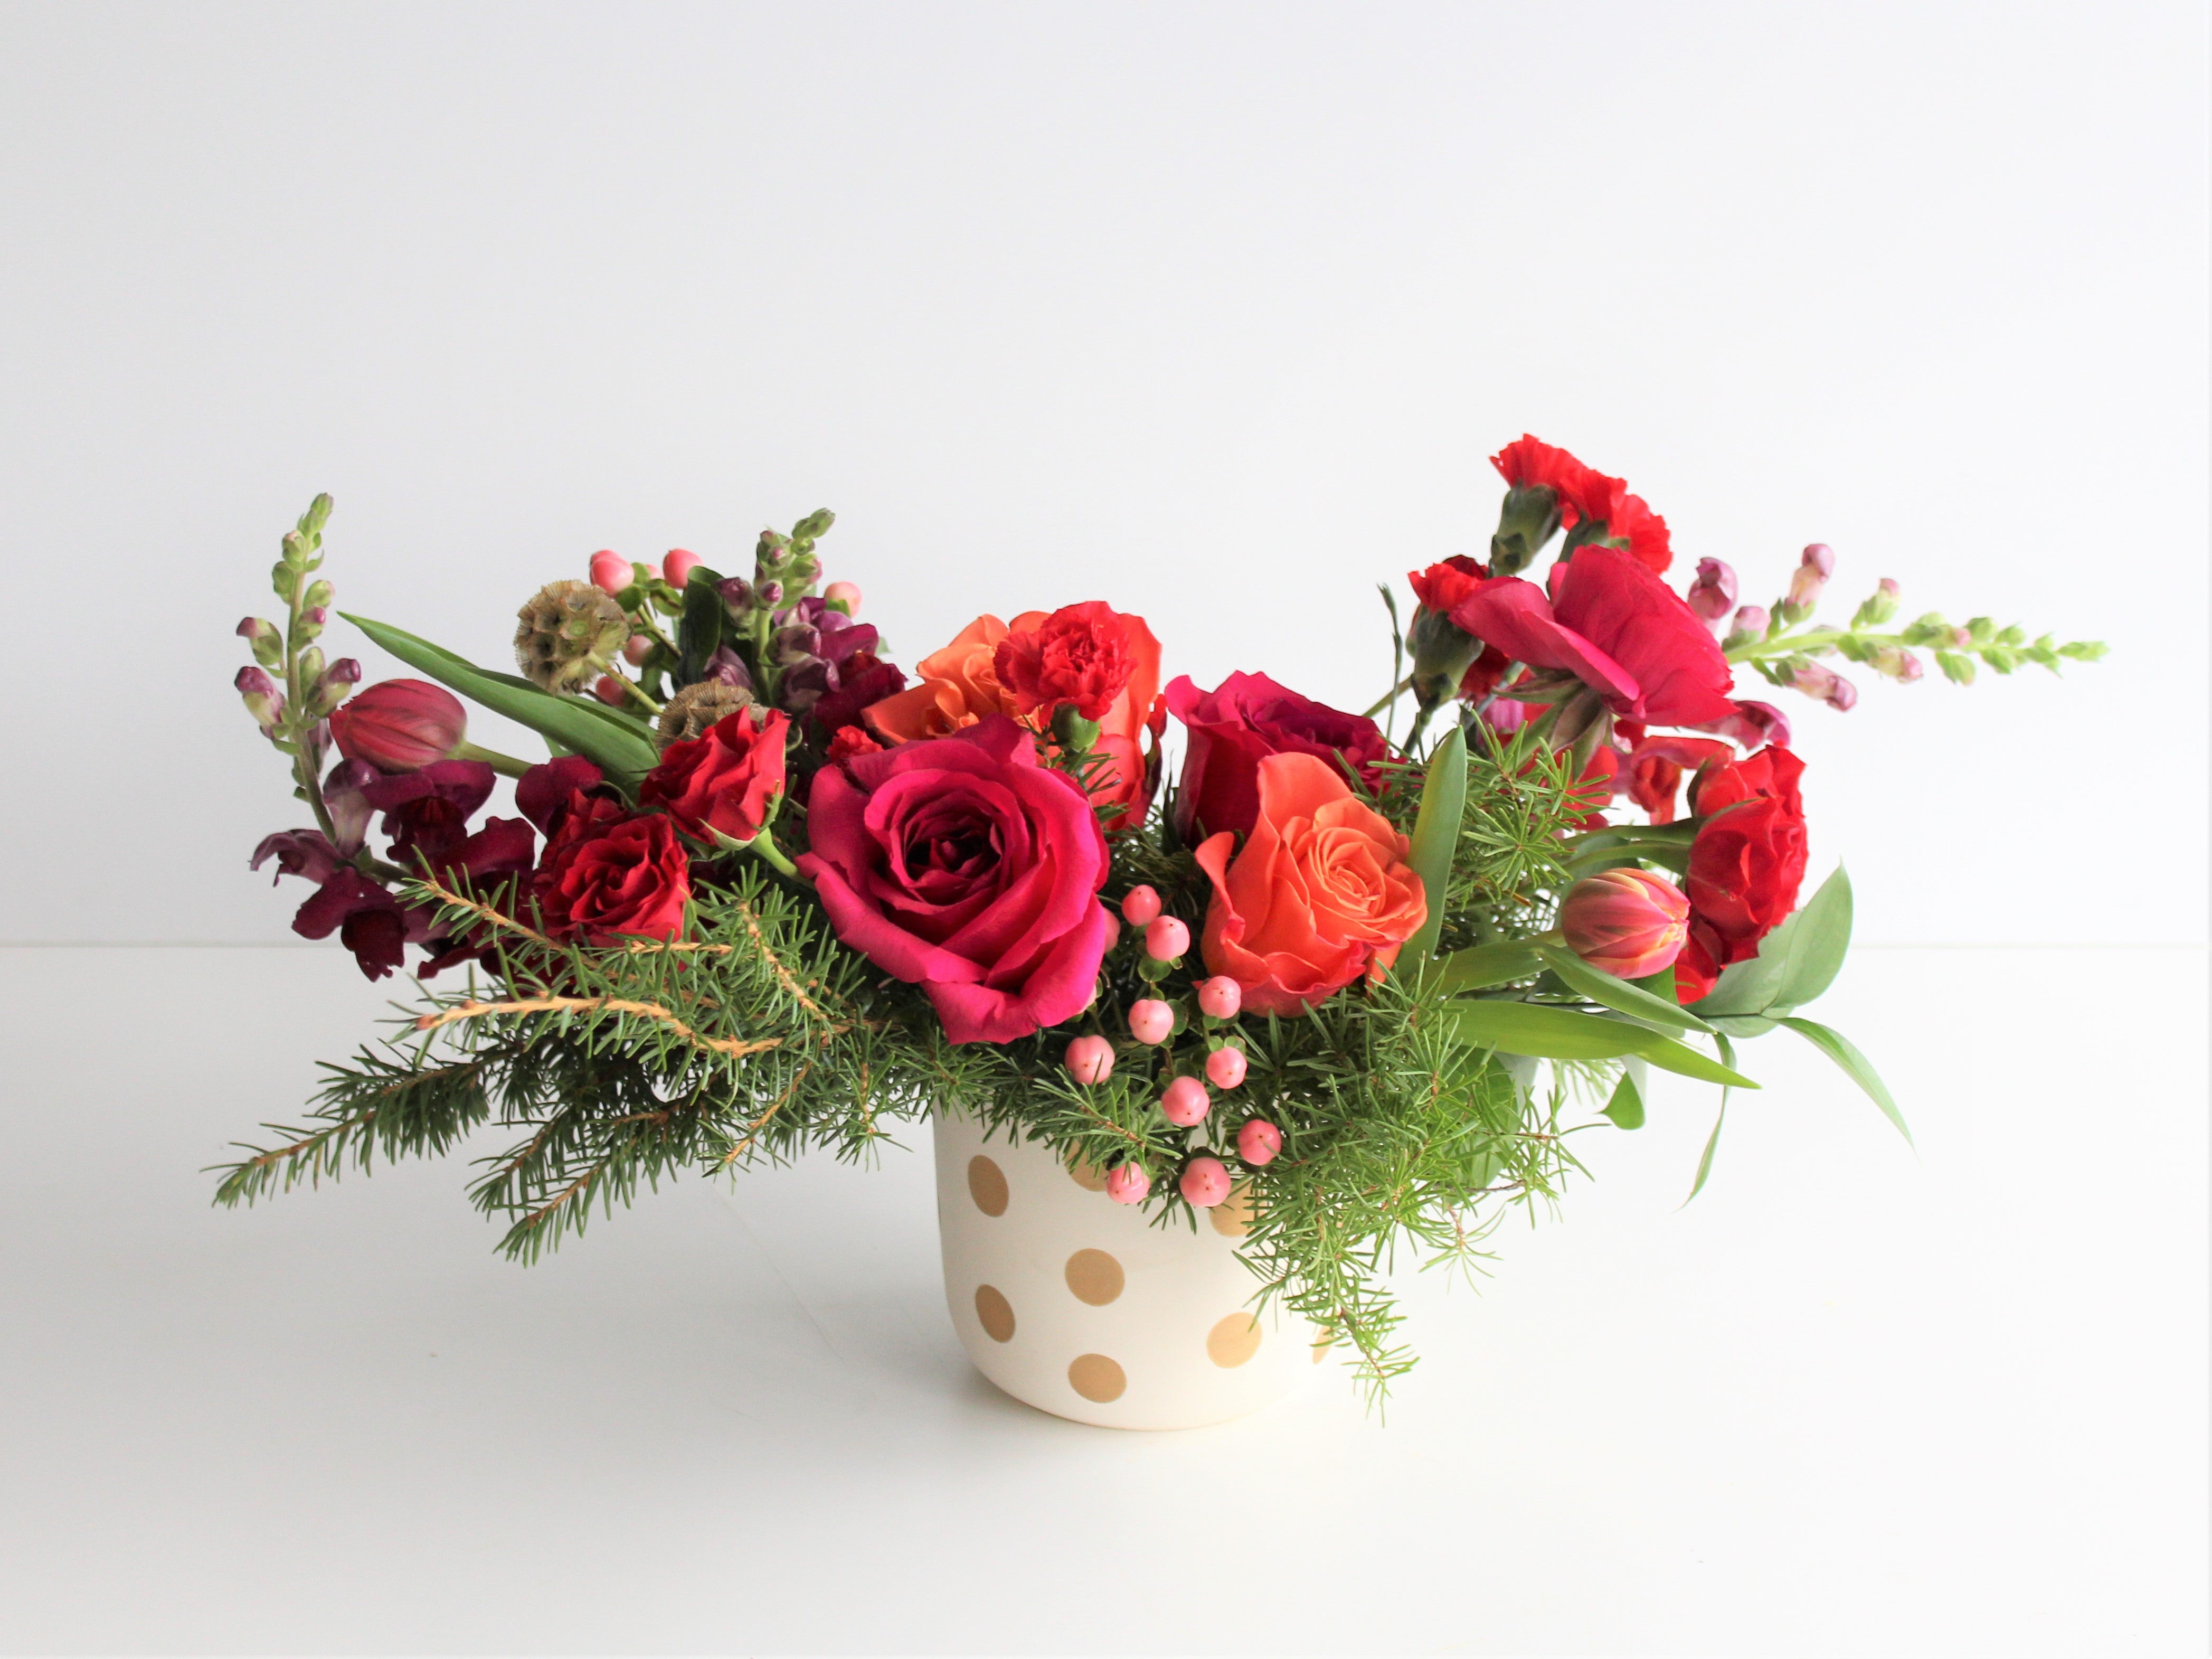 Christmas Centerpiece with Festive Colourful Flowers